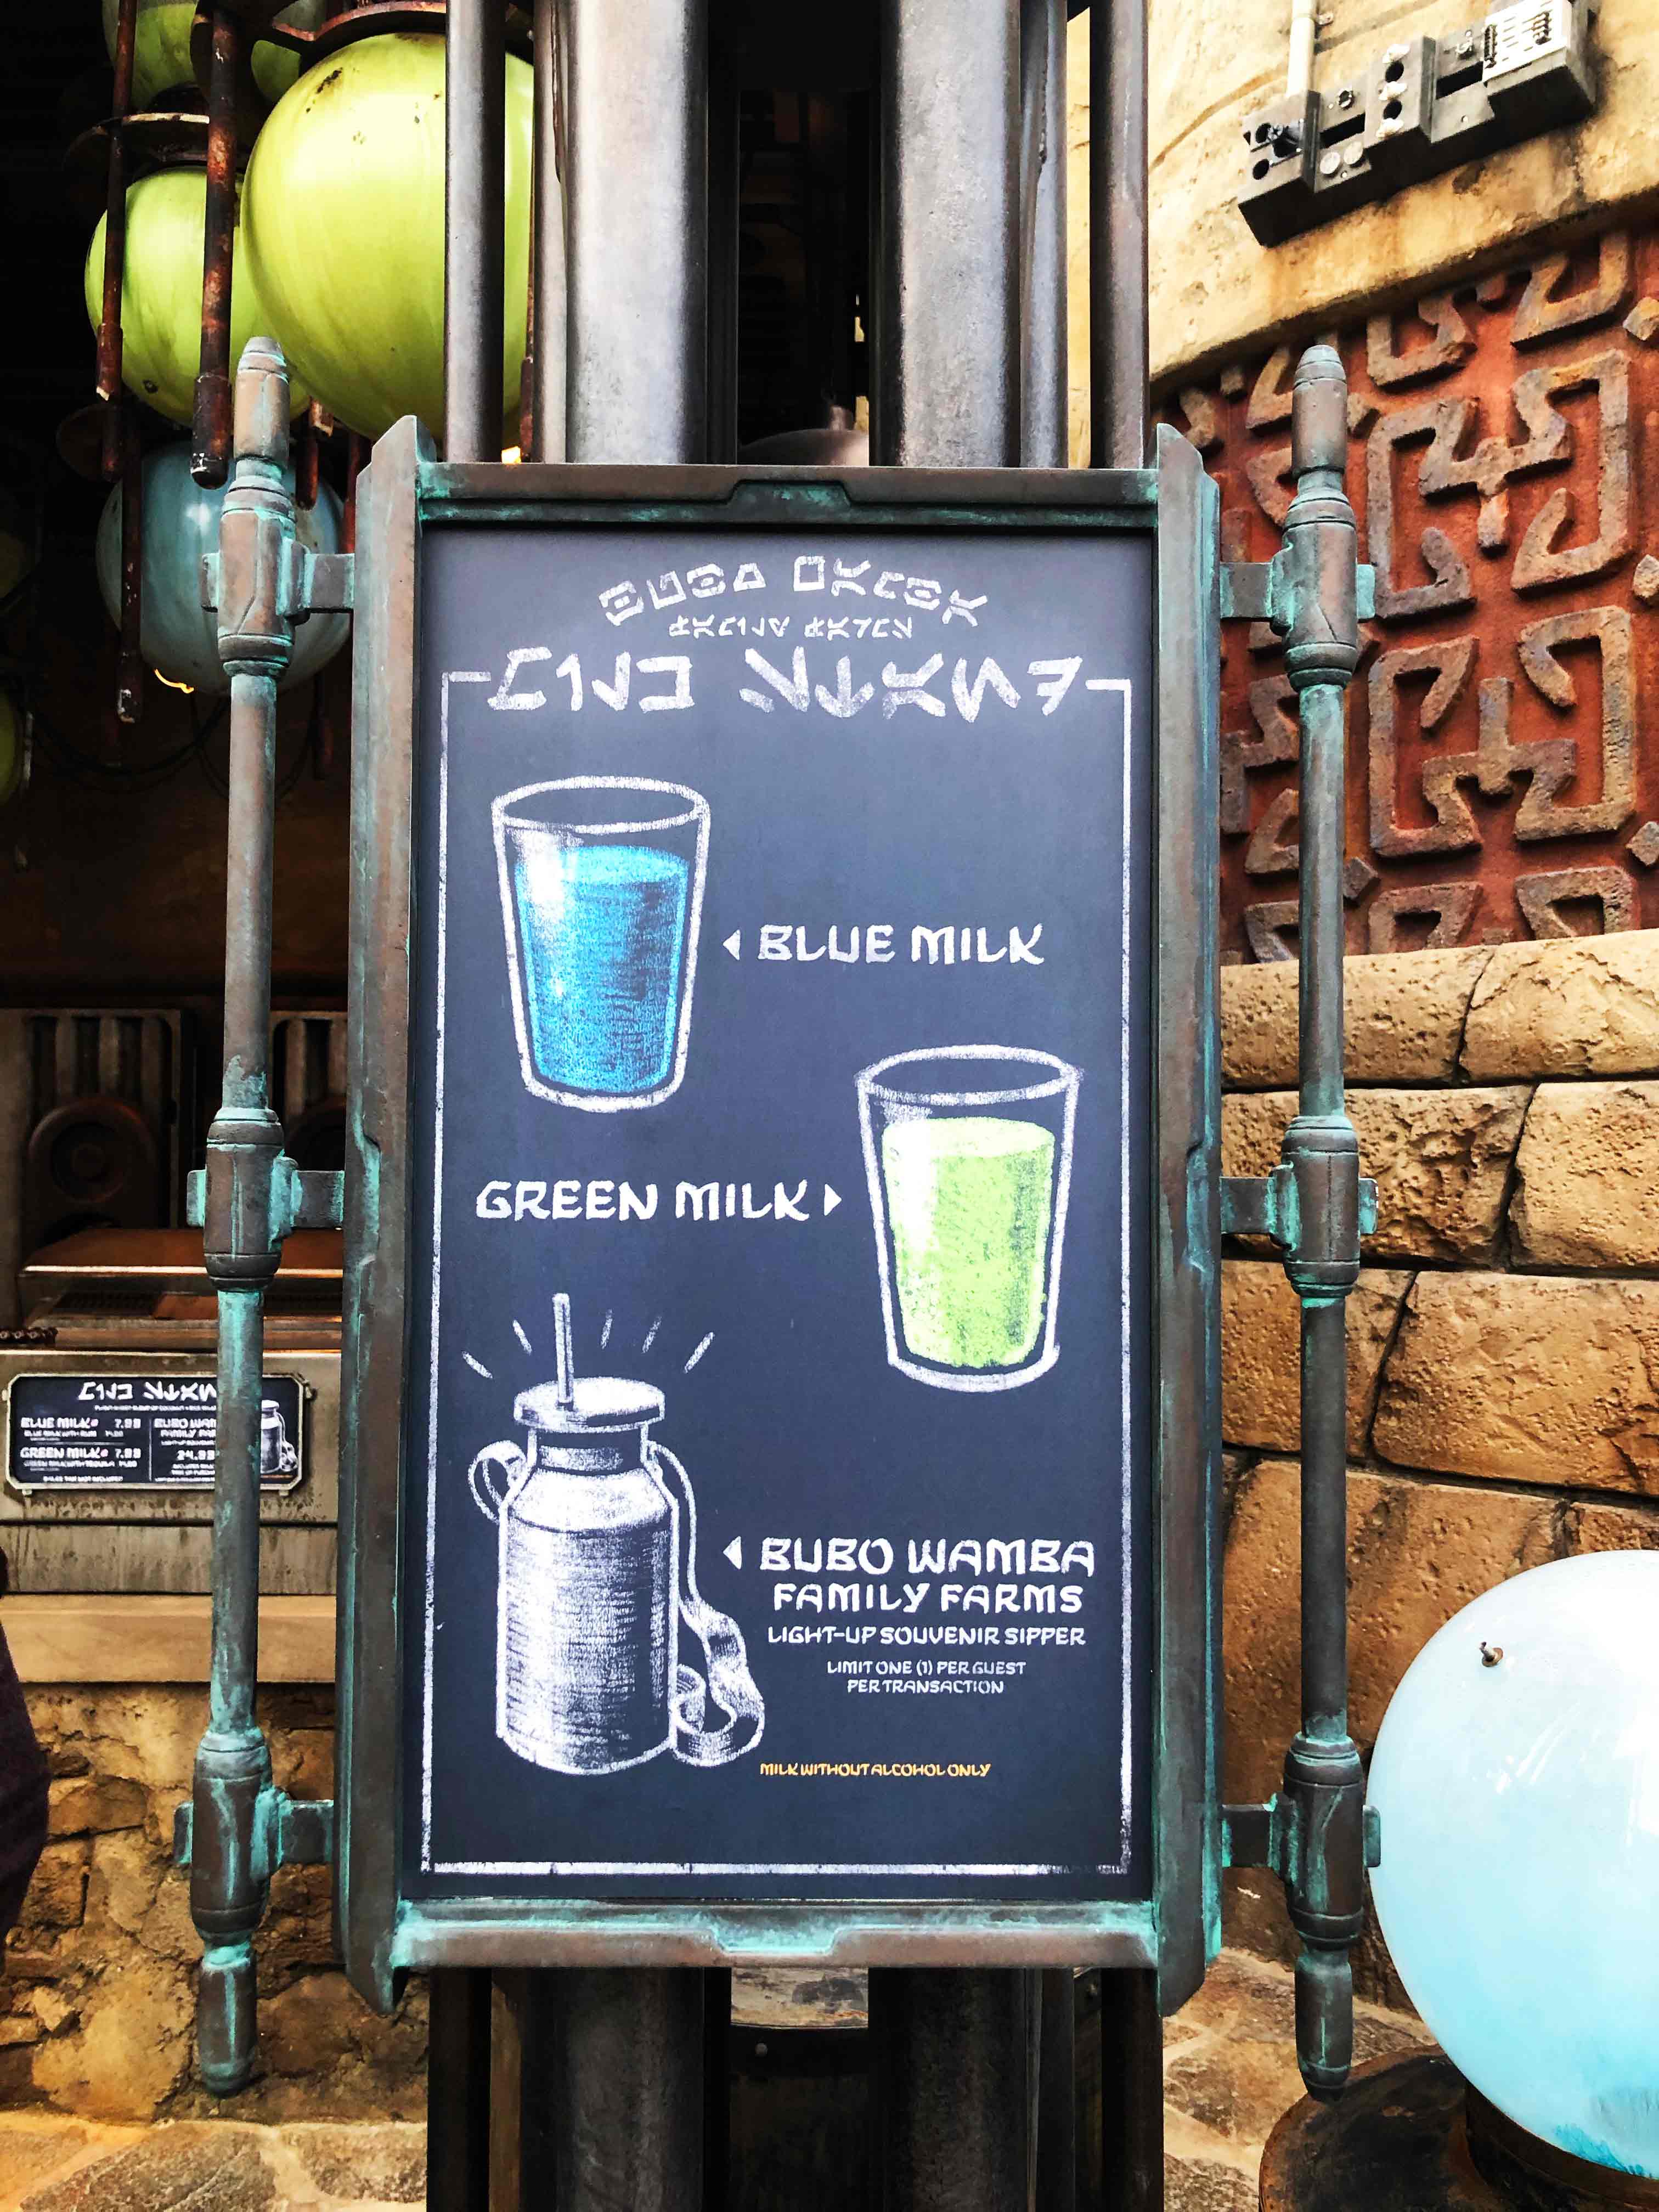 Chalkboard sign of milk options at The Milk Stand. To the right of the register counters. Daytime photo. In order from top to bottom, Blue Milk (text right, drawing of blue milk on left), Green Milk (text left, drawing of green milk on right), Bubo Wamba Family Farms Light-Up Souvenir Sipper (text right, drawing of sipper on left). Star Wars: Galaxy's Edge at Disney's Hollywood Studios®. Lake Buena Vista, Florida.